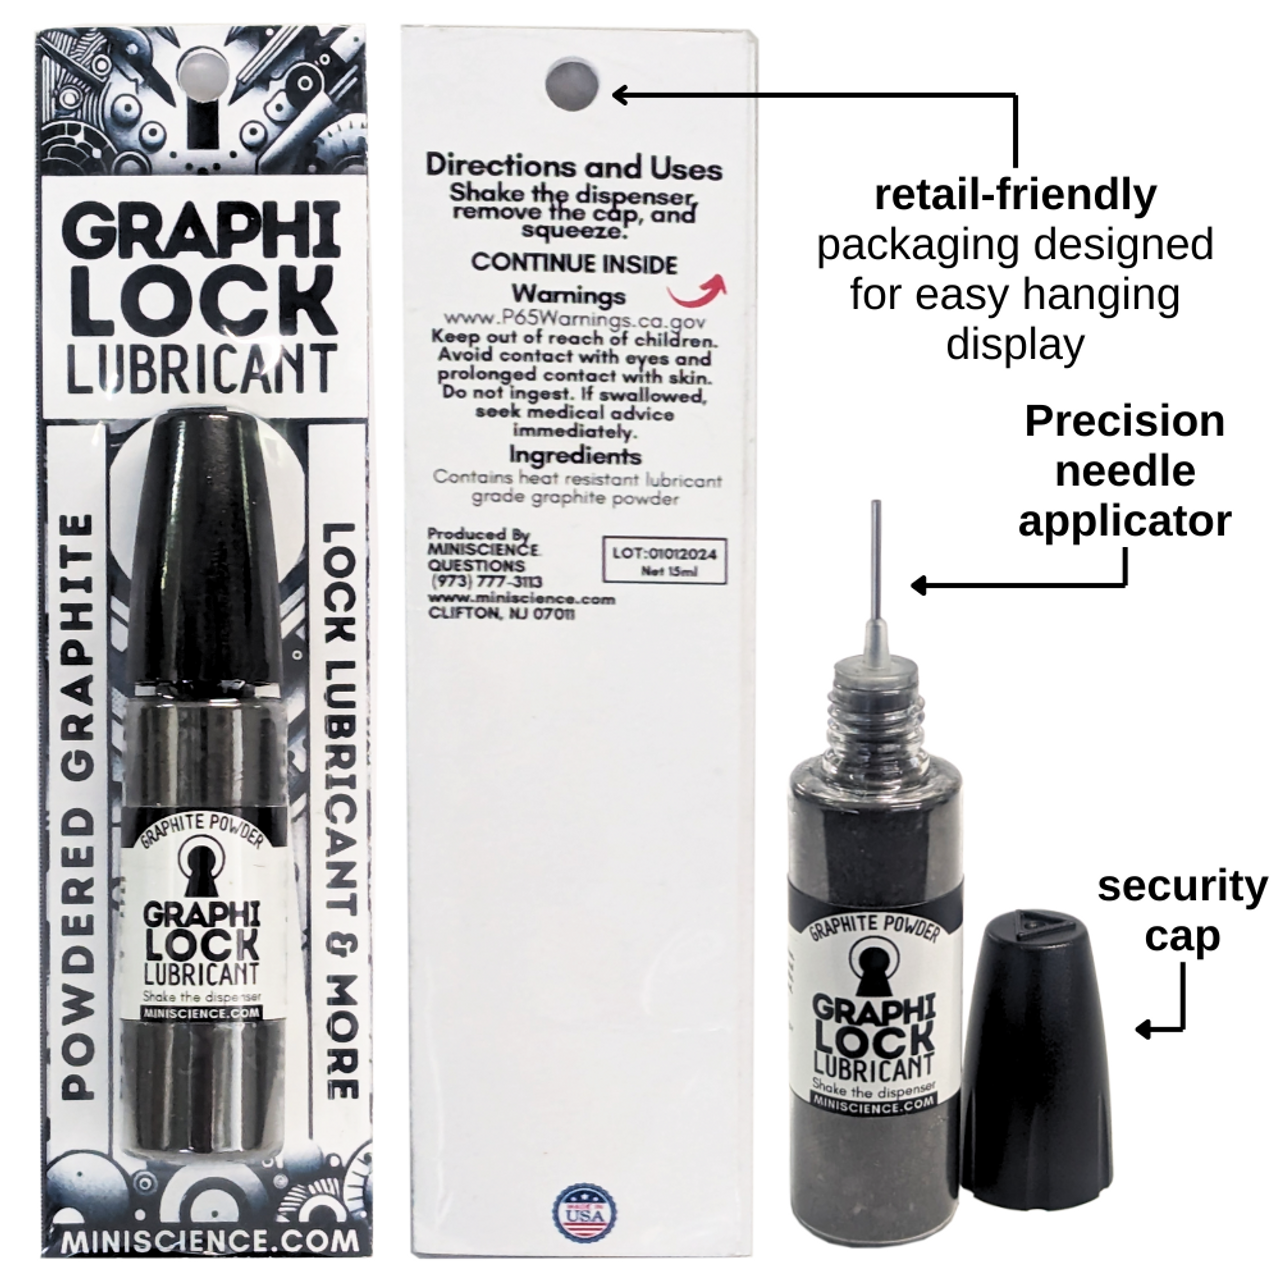 Discover GraphiLock Premium Micronized Graphite Lubricant for superior lubrication in locks and machinery. High-purity graphite ensures optimal performance in various conditions.